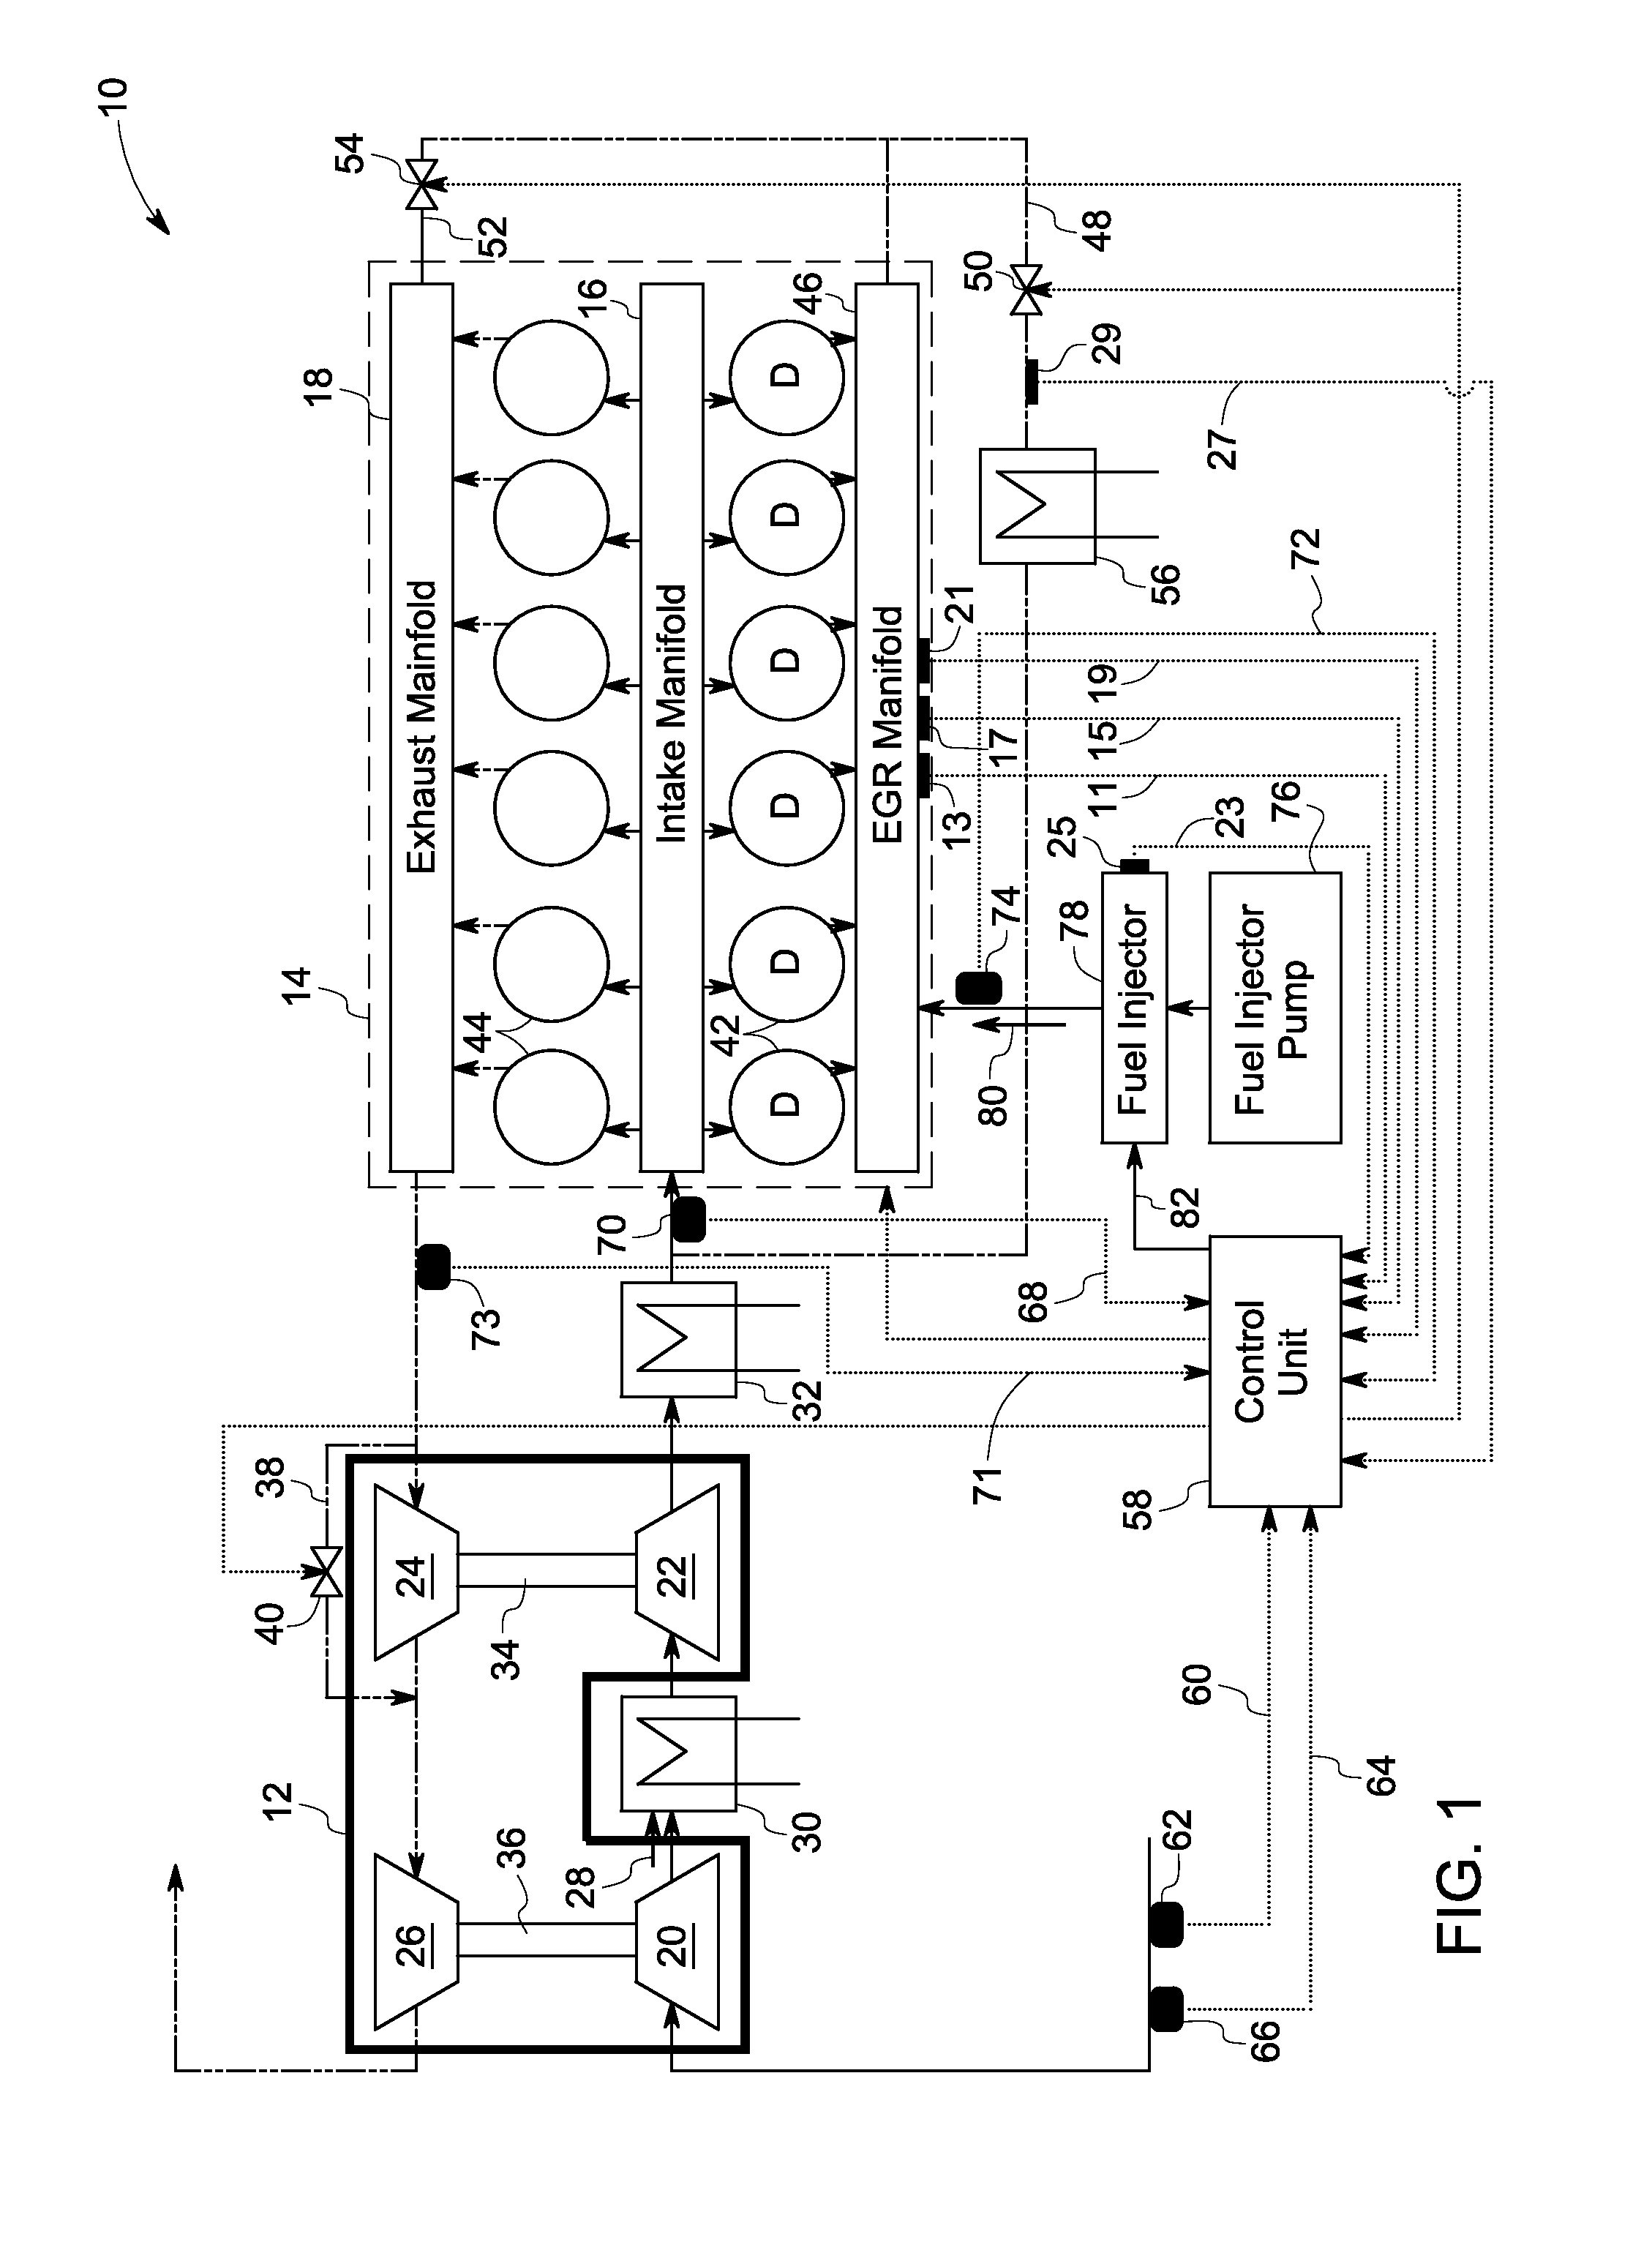 System and method for controlling exhaust emissions and specific fuel consumption of an engiine